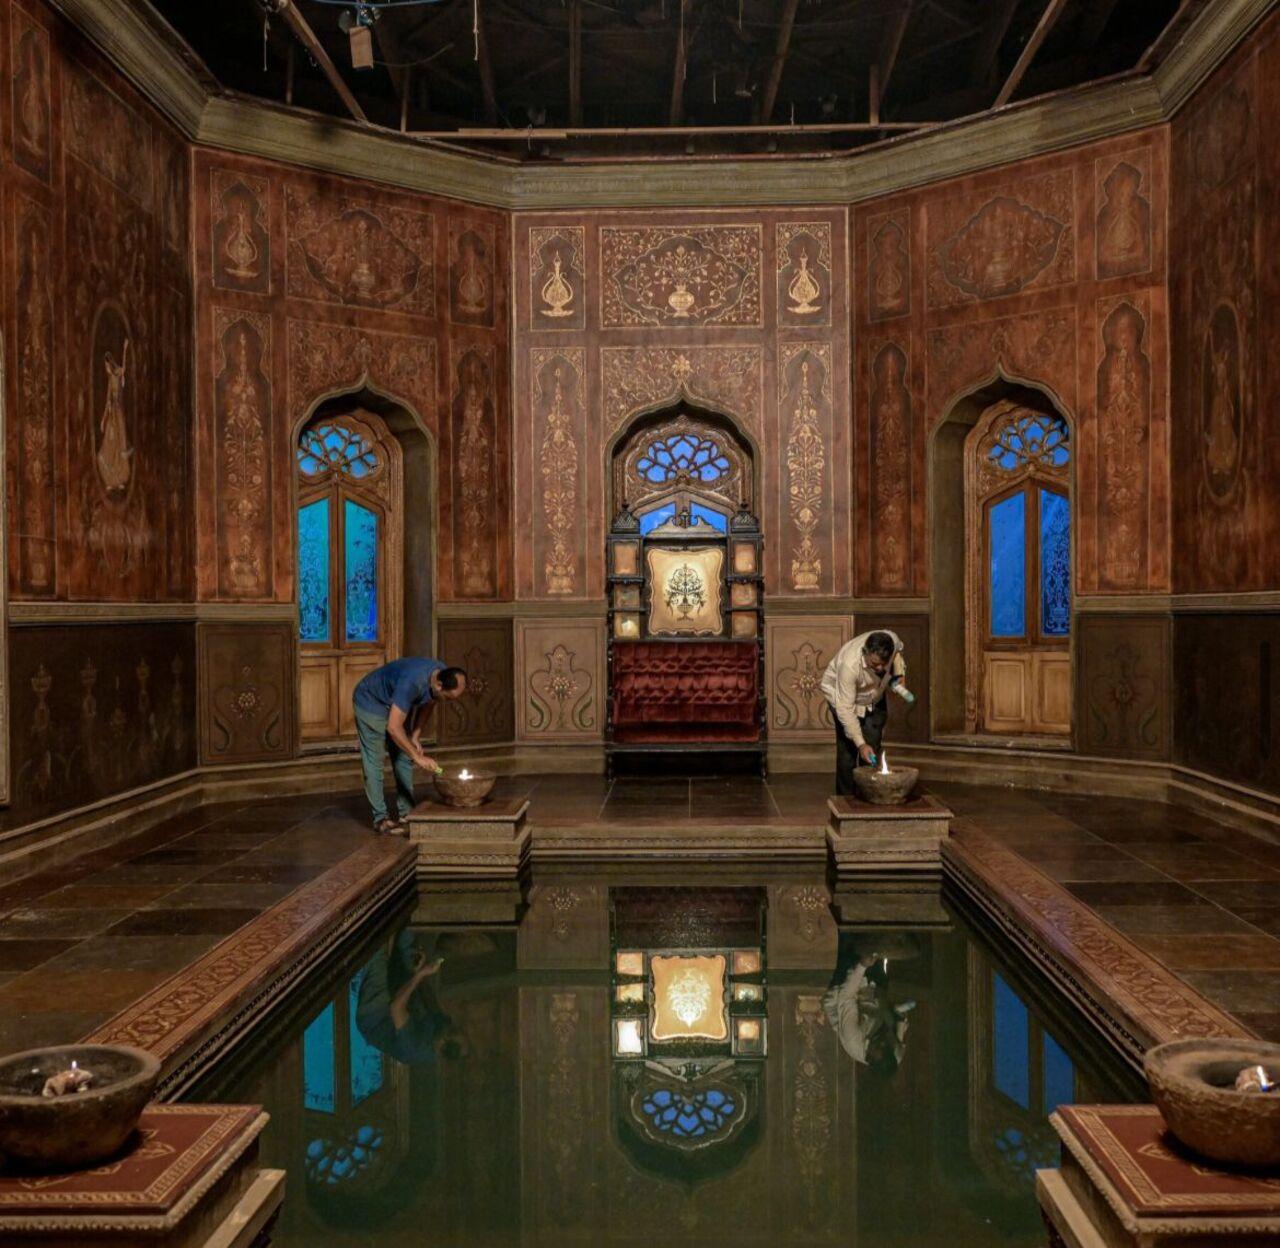 For instance this hamam - where Sharmin Segal loses one of the 101 pearls and is ordered by her mother Manisha Koirala to find it or she will have her friend sold off. 